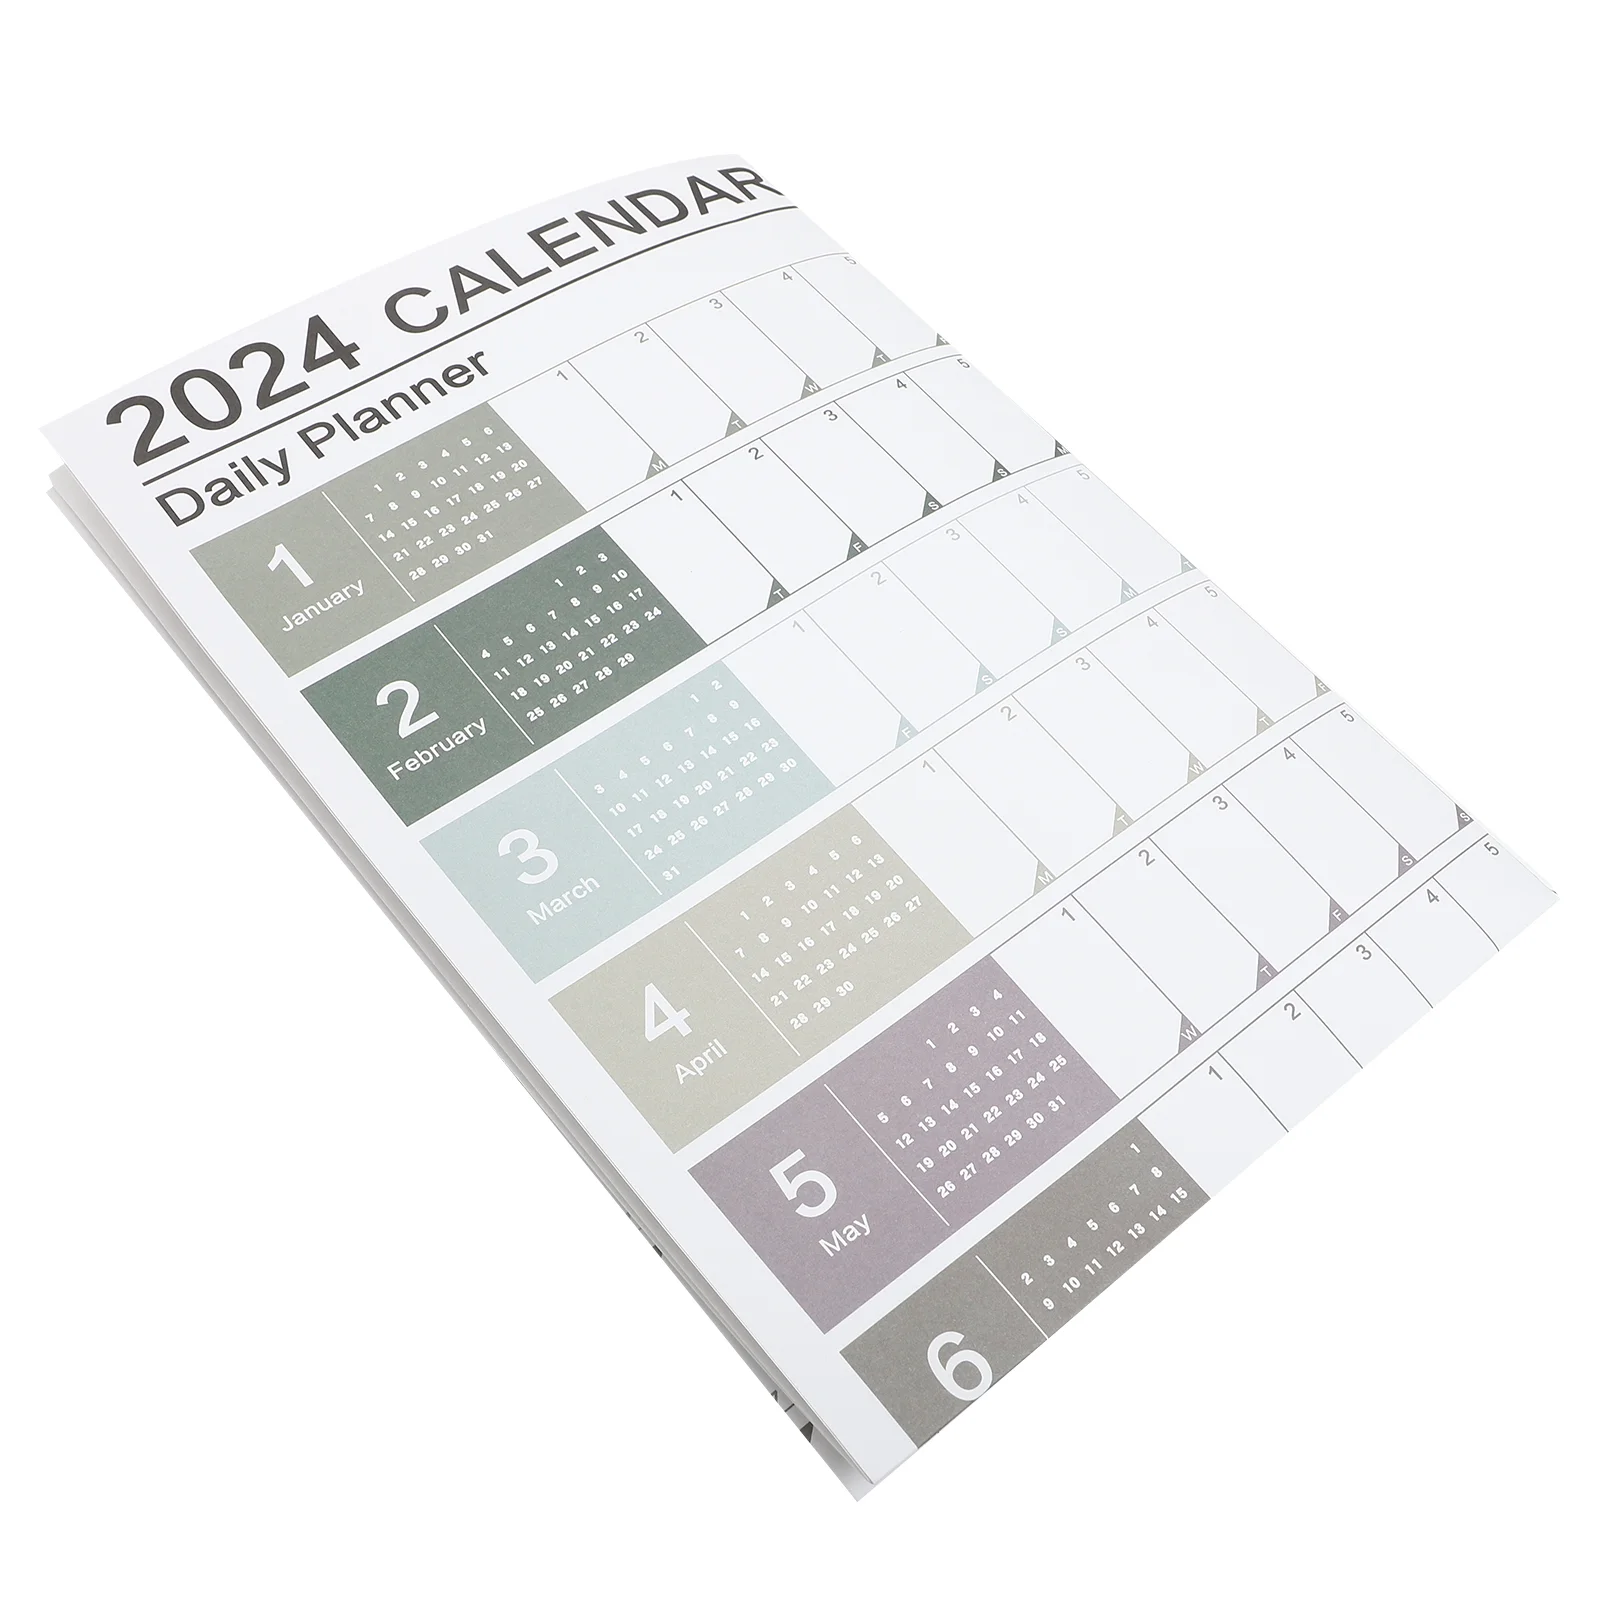 

Yearly Wall Hanging Calendar Planner Wall Calendar Daily Schedule Calendar Hanging Planner Office Schedule Planning Note